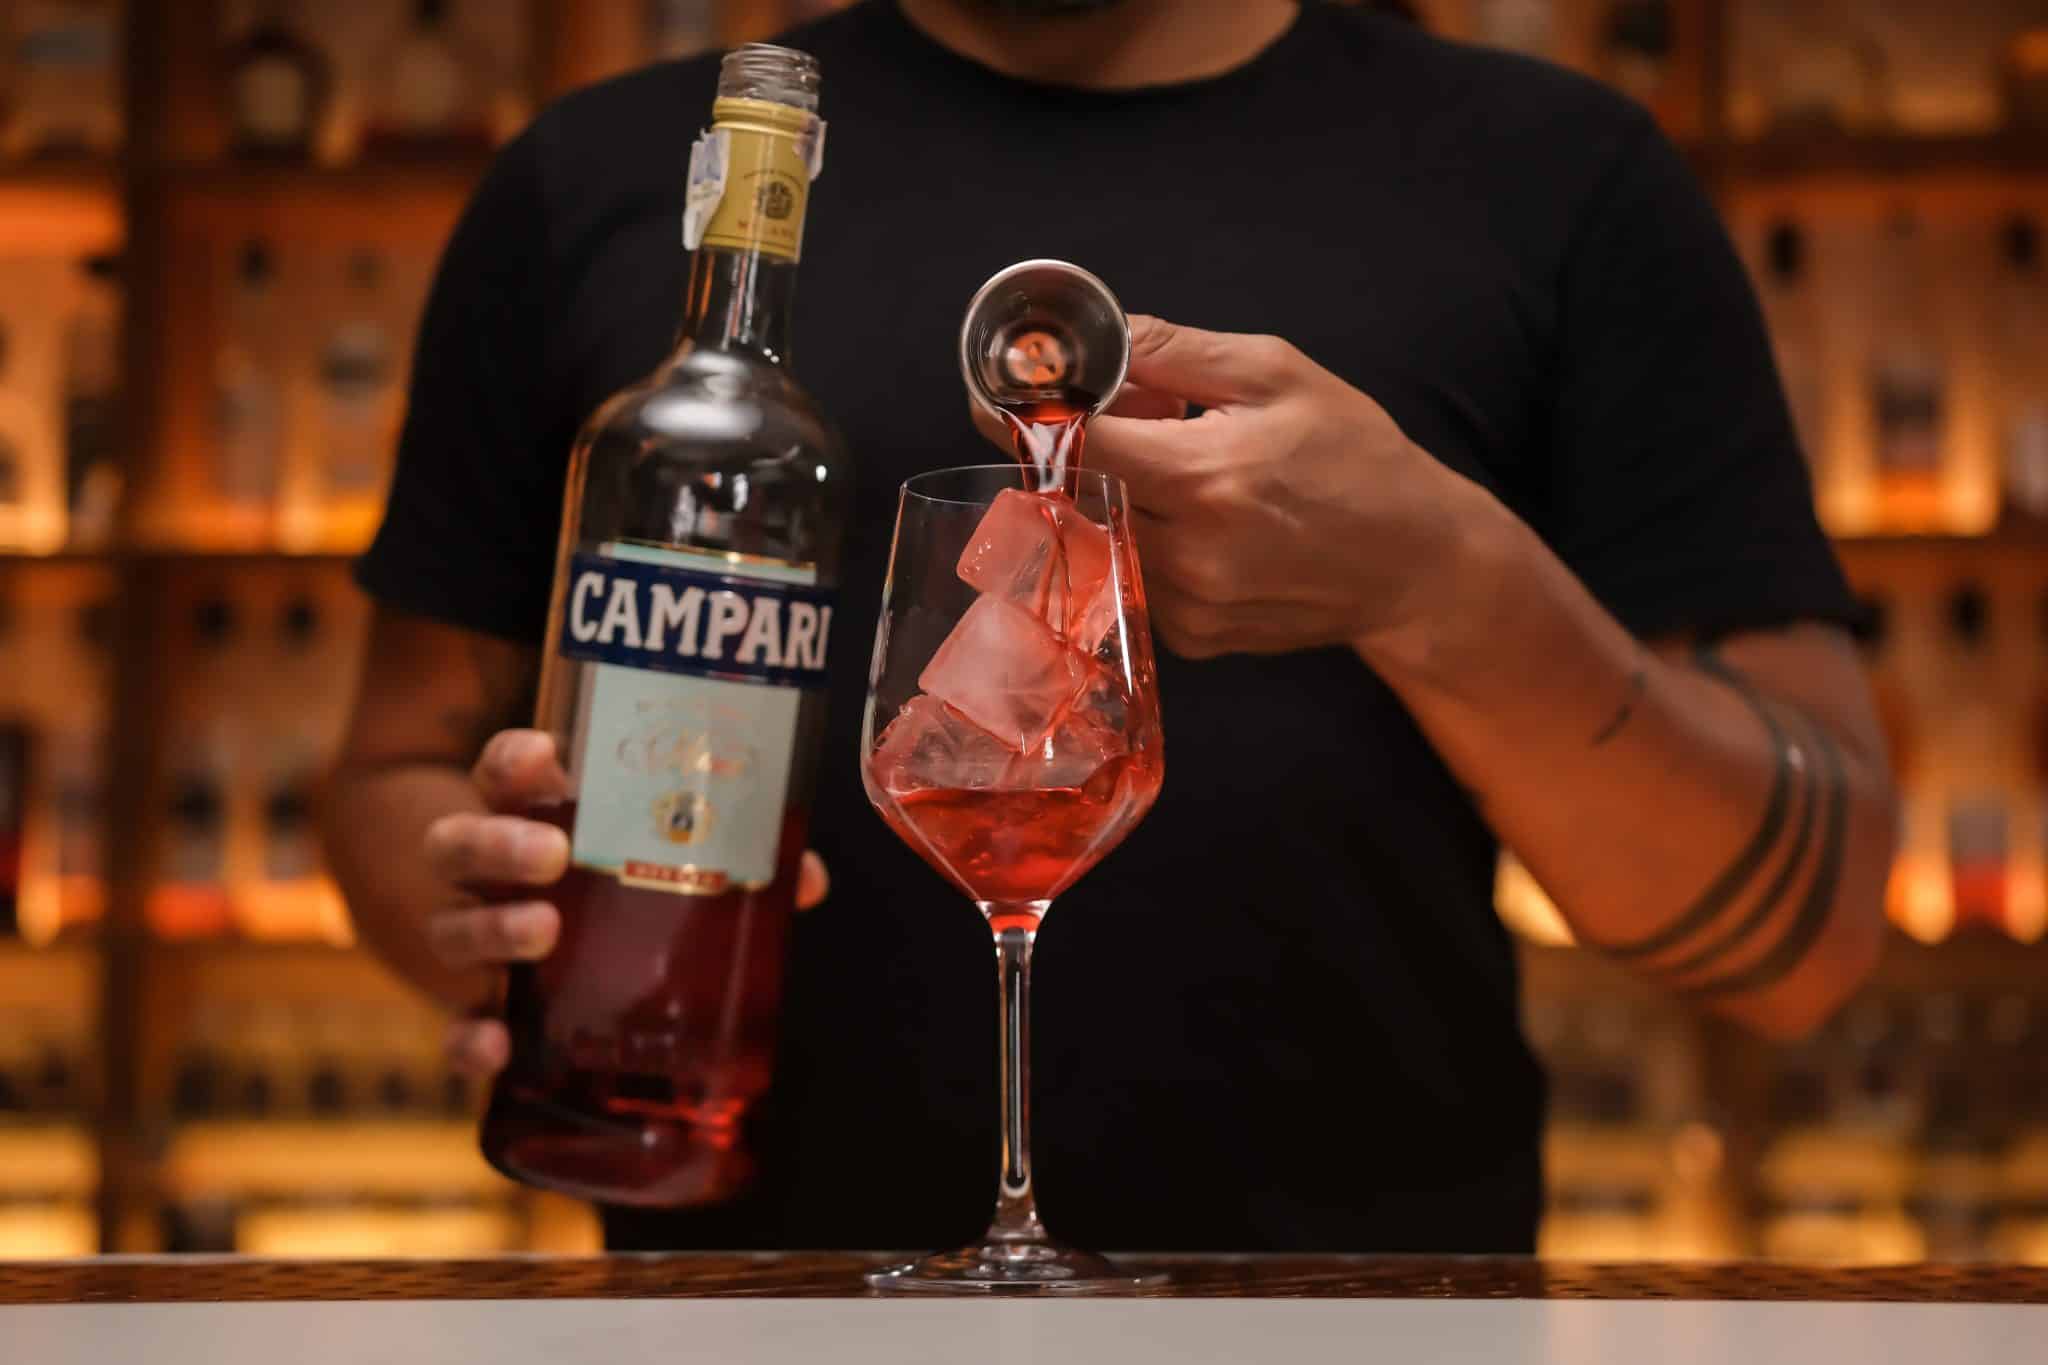 <p>Measure and pour 2 oz of Campari into the glass, introducing a bold bitterness and a vibrant red color.</p>
